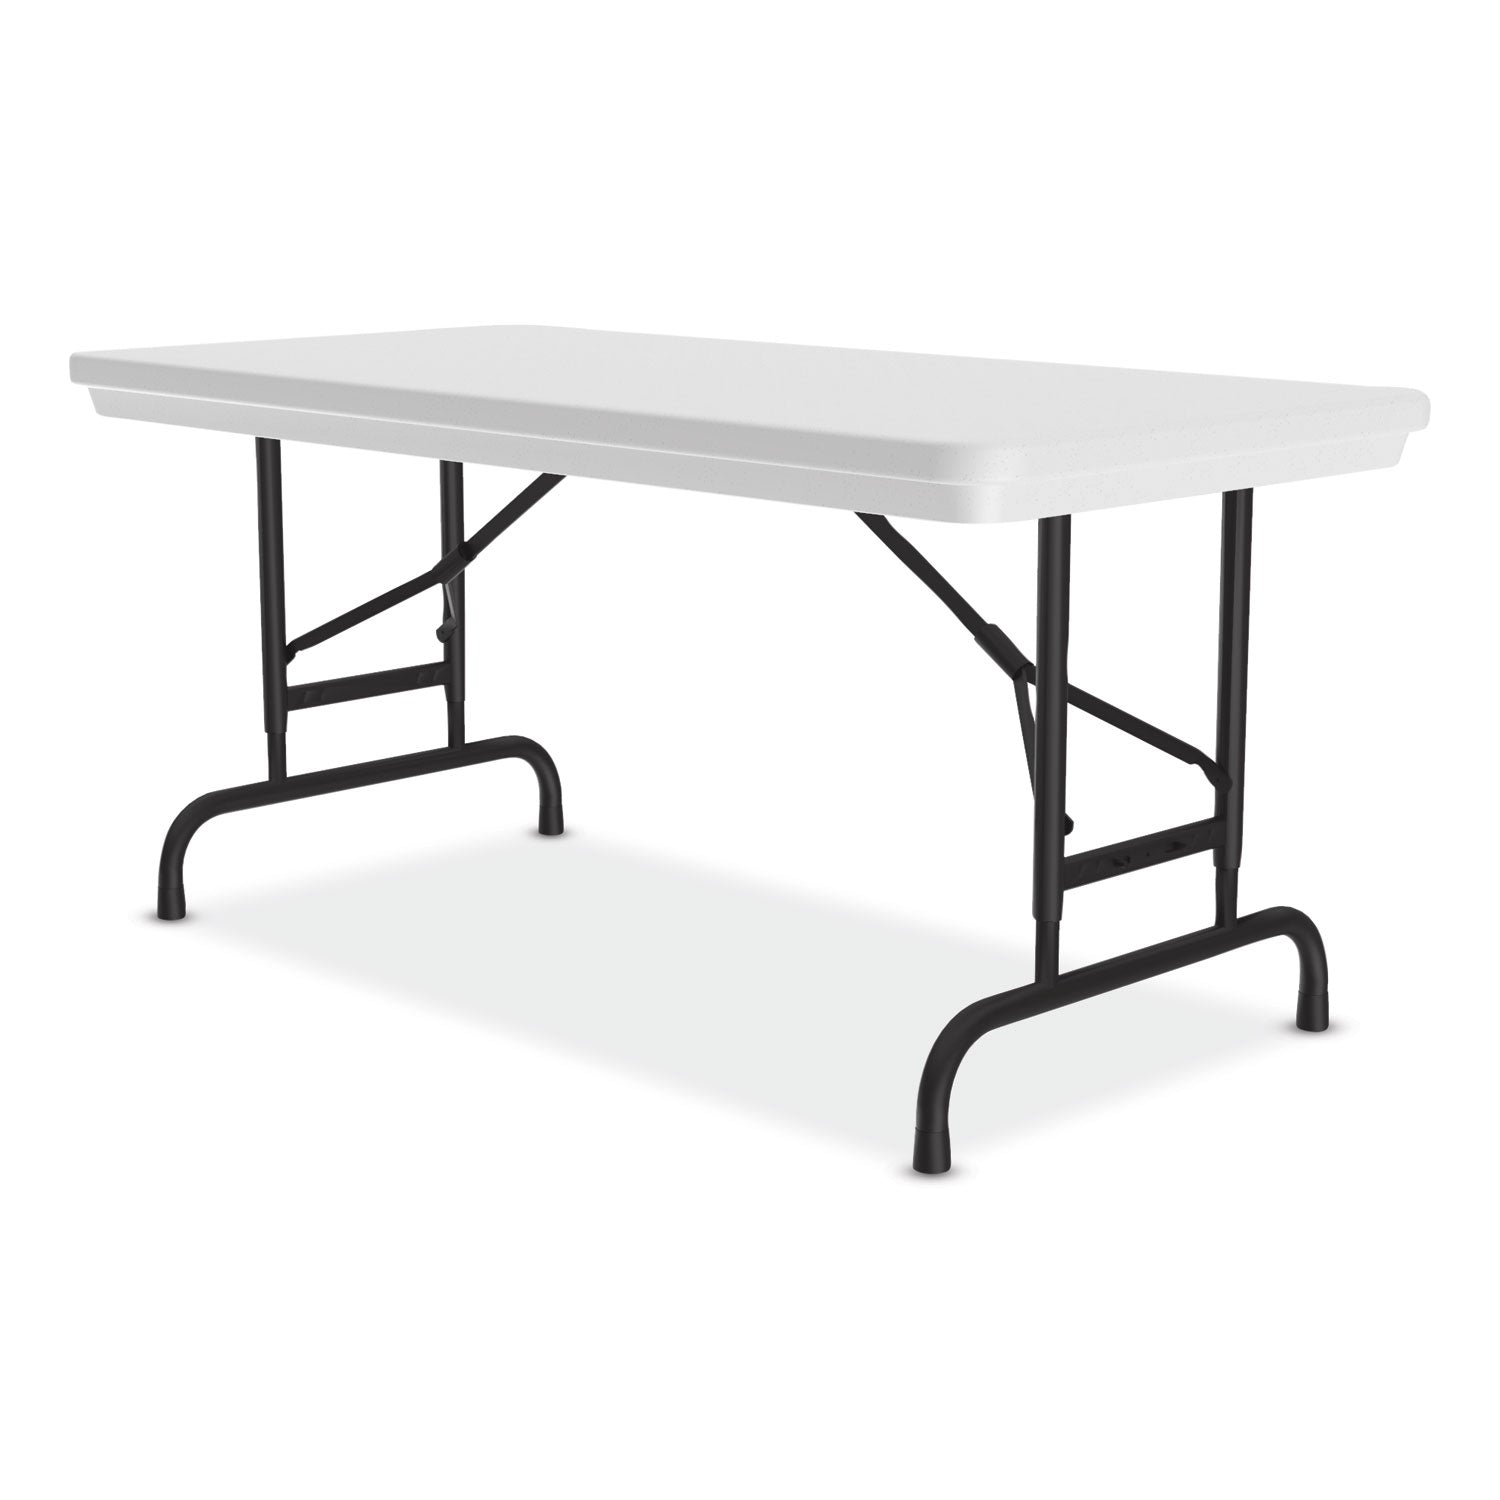 adjustable-folding-table-rectangular-48-x-24-x-22-to-32-gray-top-black-legs-4-pallet-ships-in-4-6-business-days_crlra2448234p - 8